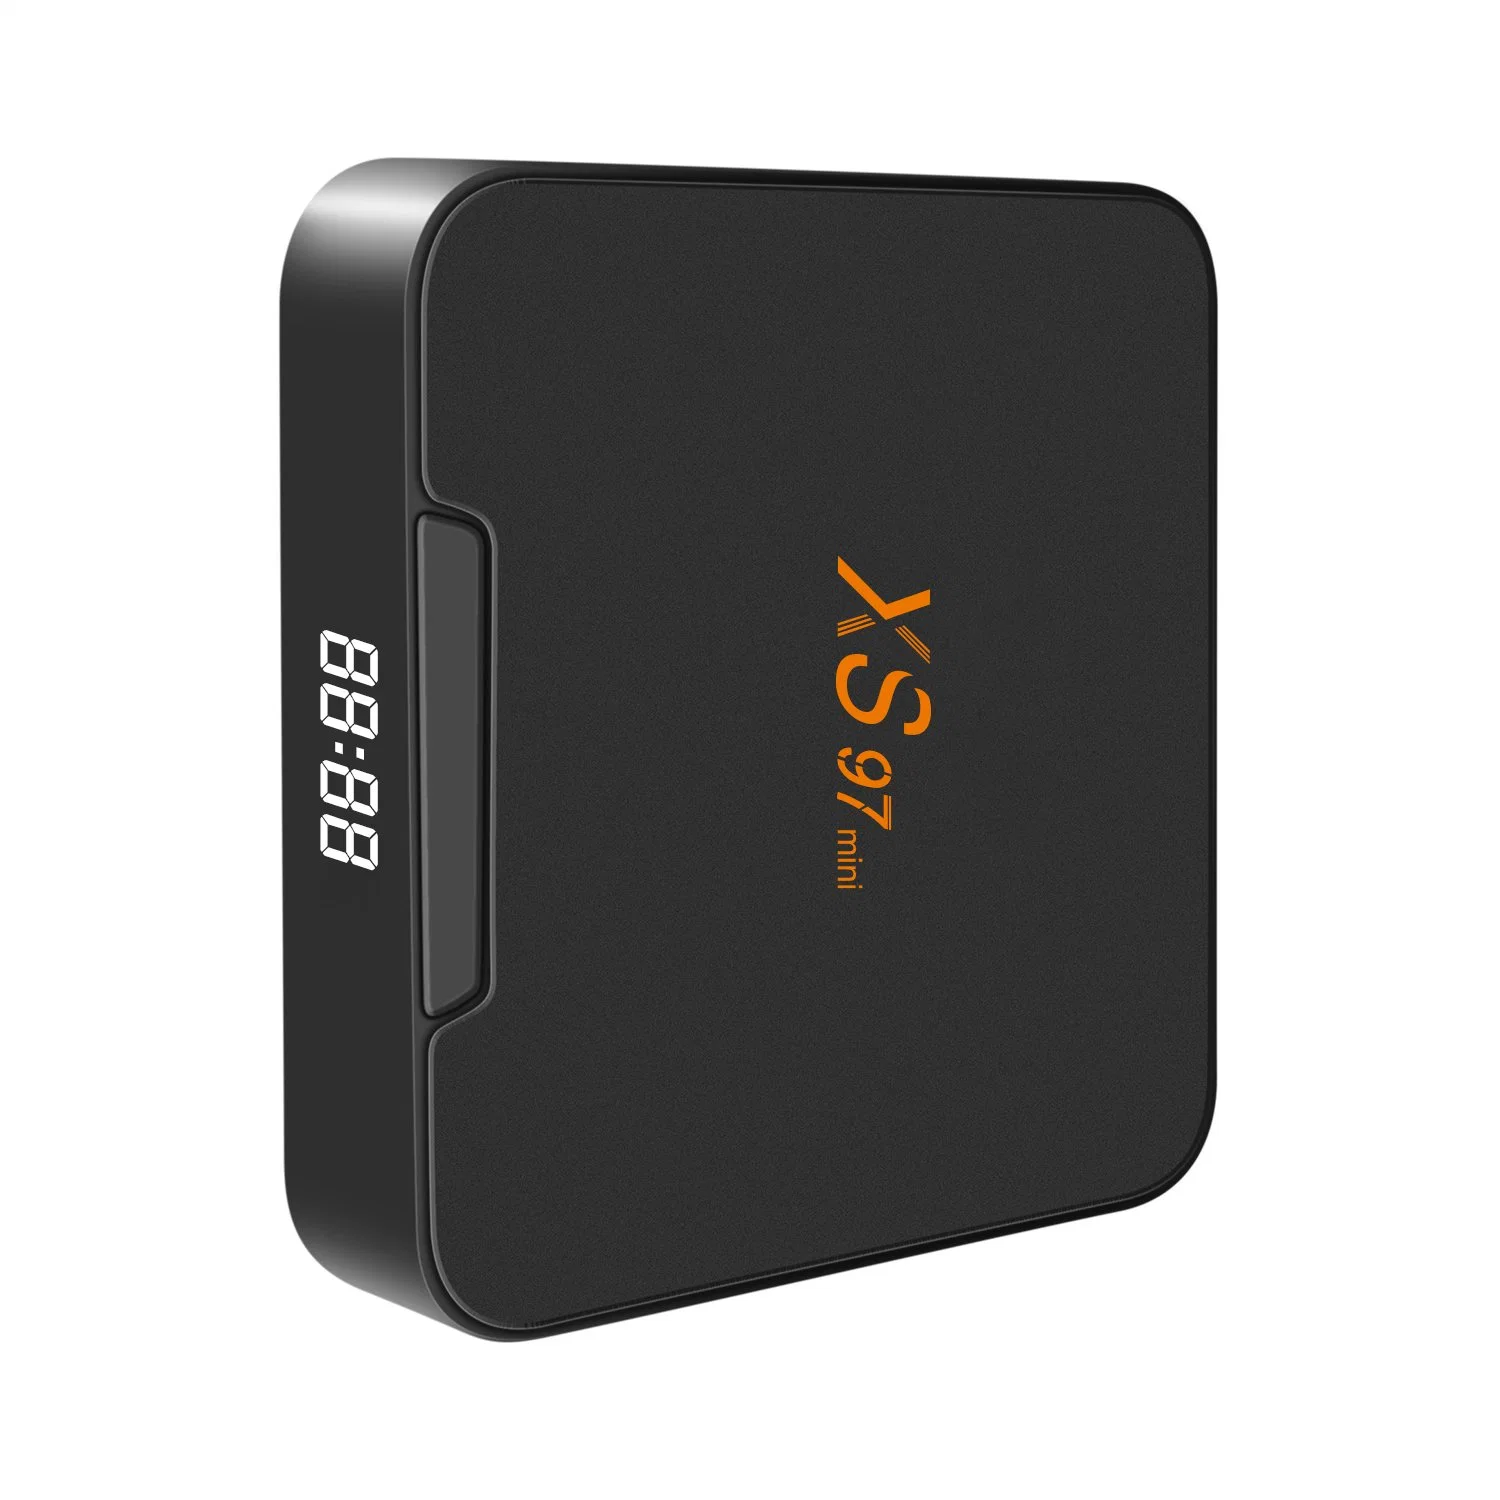 Wholesale/Supplier New Materials Xs97 Mini 4 Core 64bit 2.4G+5g WiFi 2+16GB Global Android TV Box with OEM Suppliers